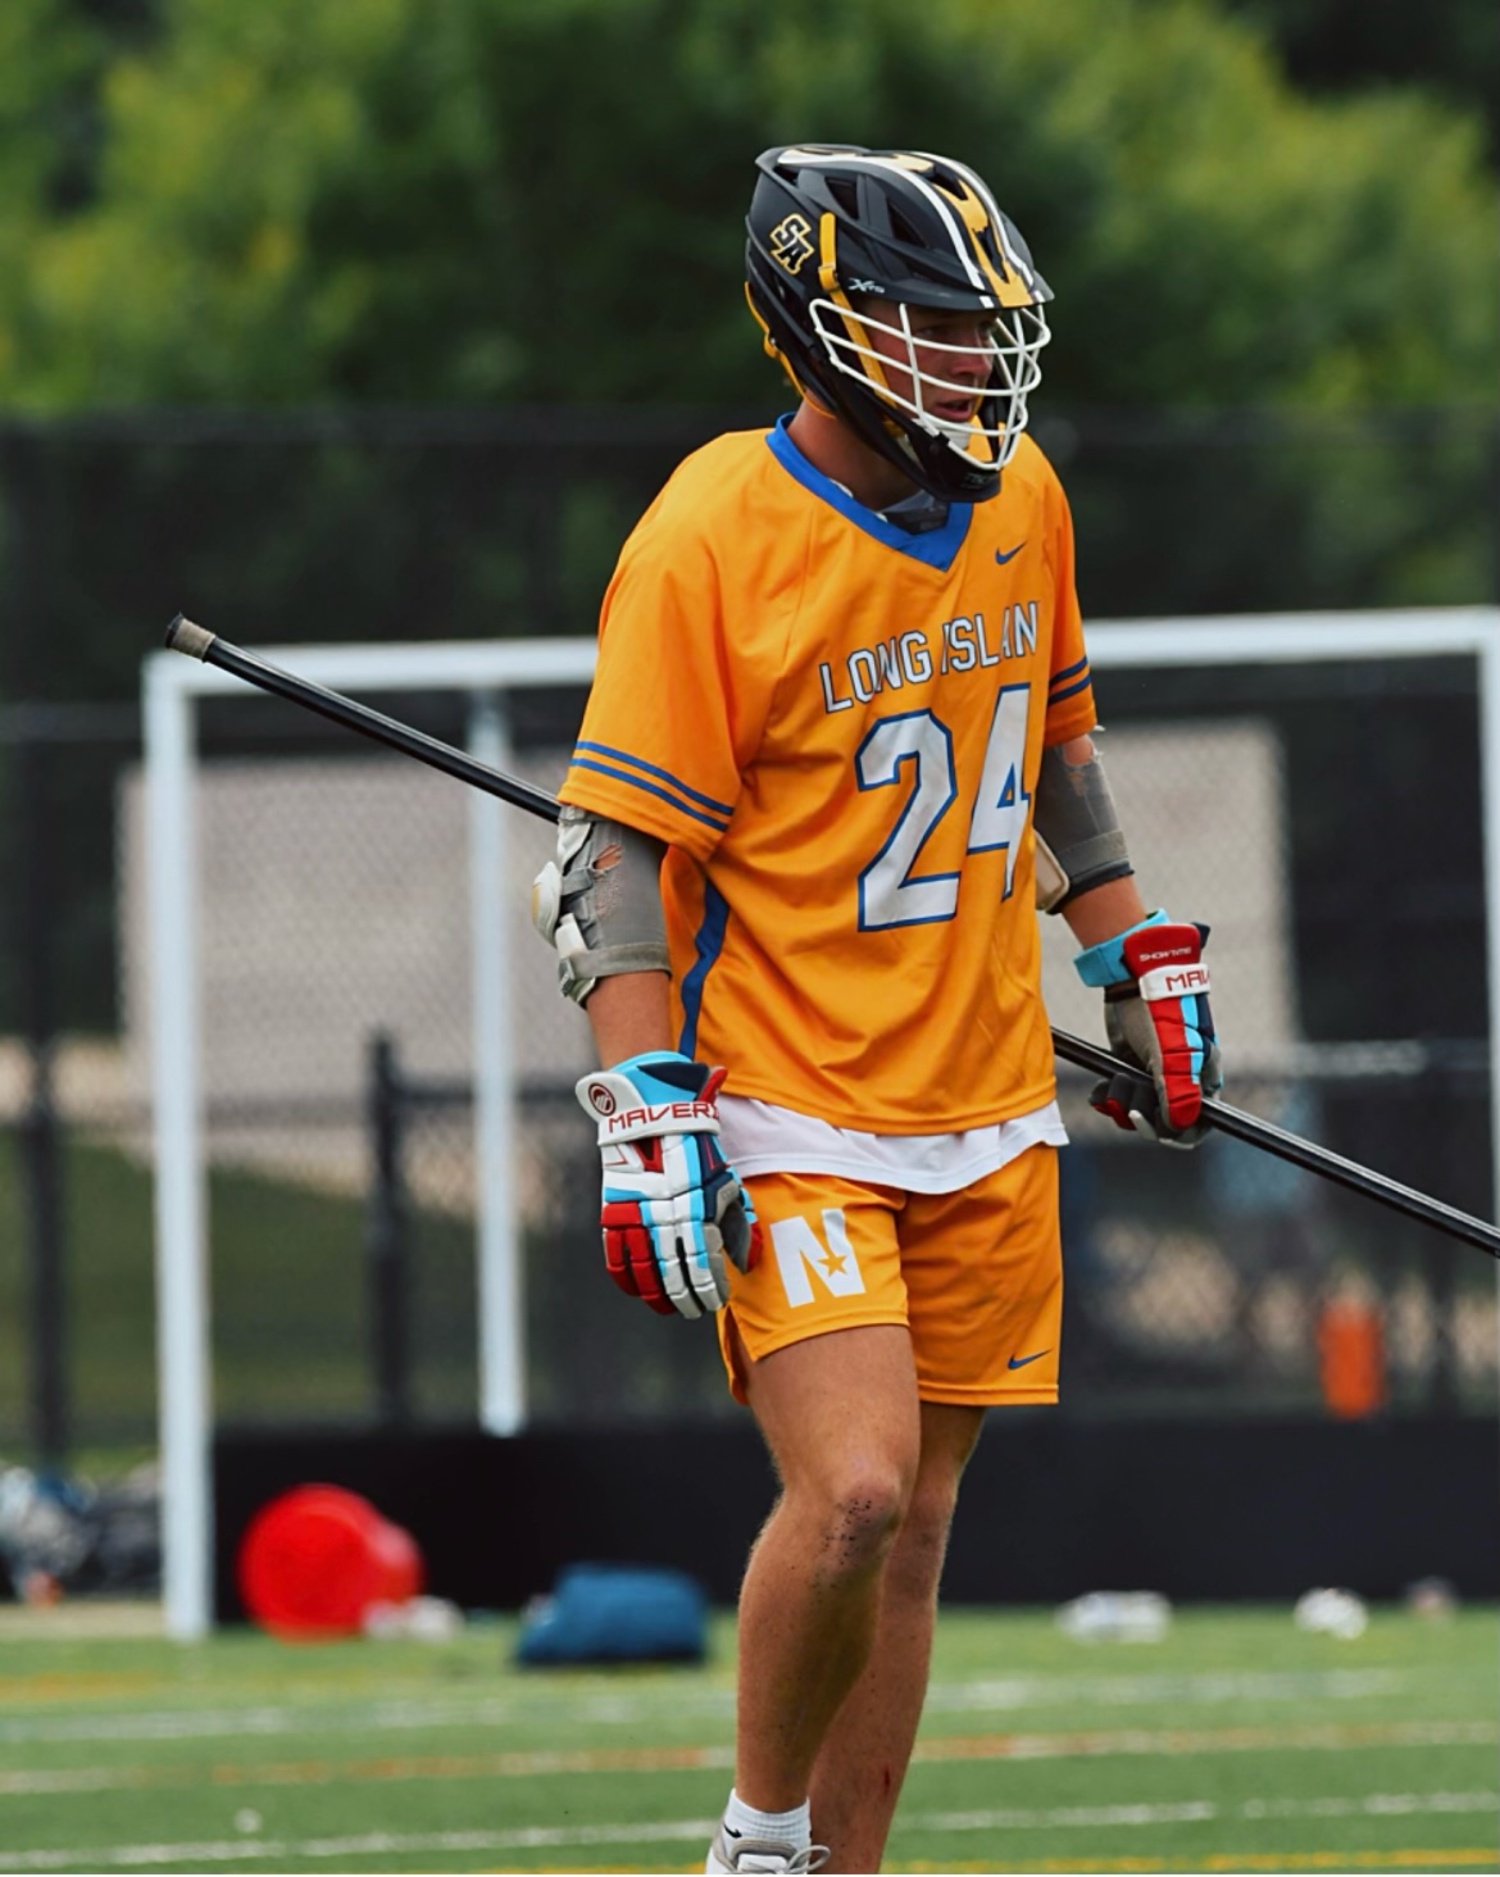 Ethan Bramoff represented Long Island in the Nike National All Star Games this summer.